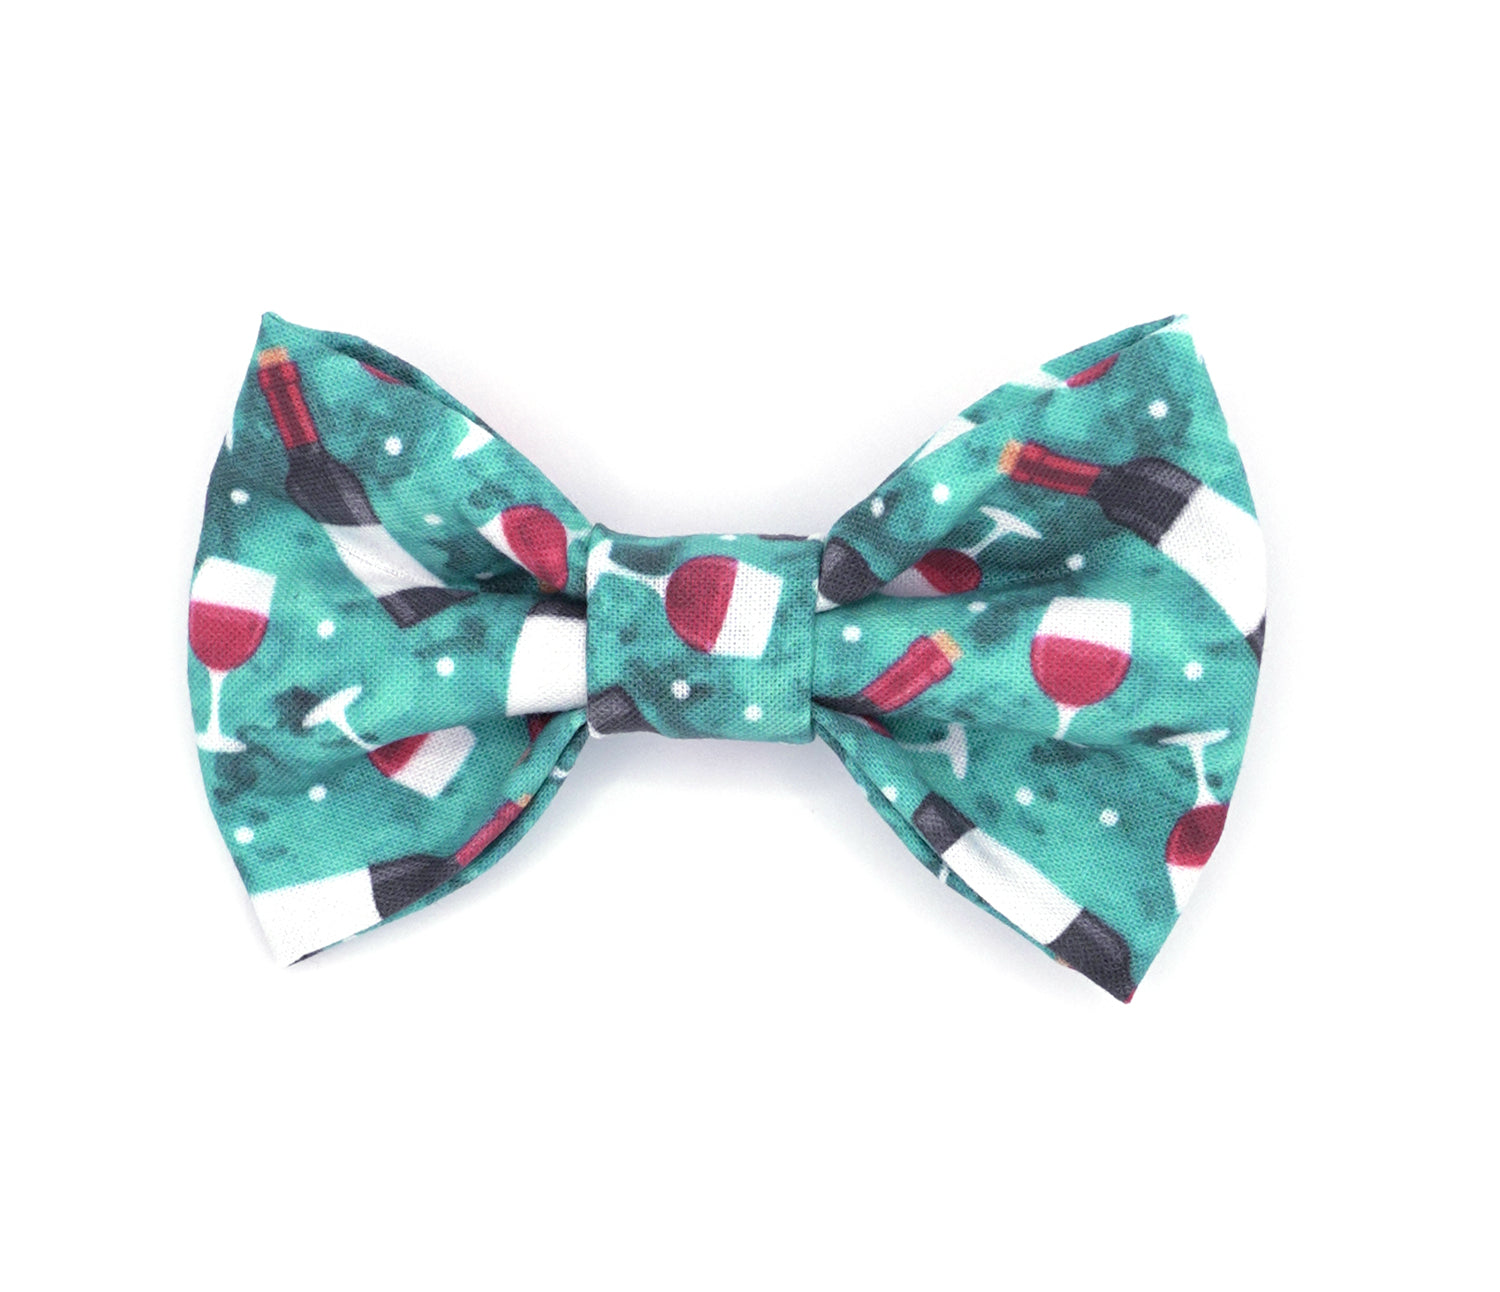 Handmade cotton bow tie for dogs (or other pets). Elastic straps on back with snaps make it easy to add to collar, harness, or leash. Turquoise background with red wine bottles and glasses.